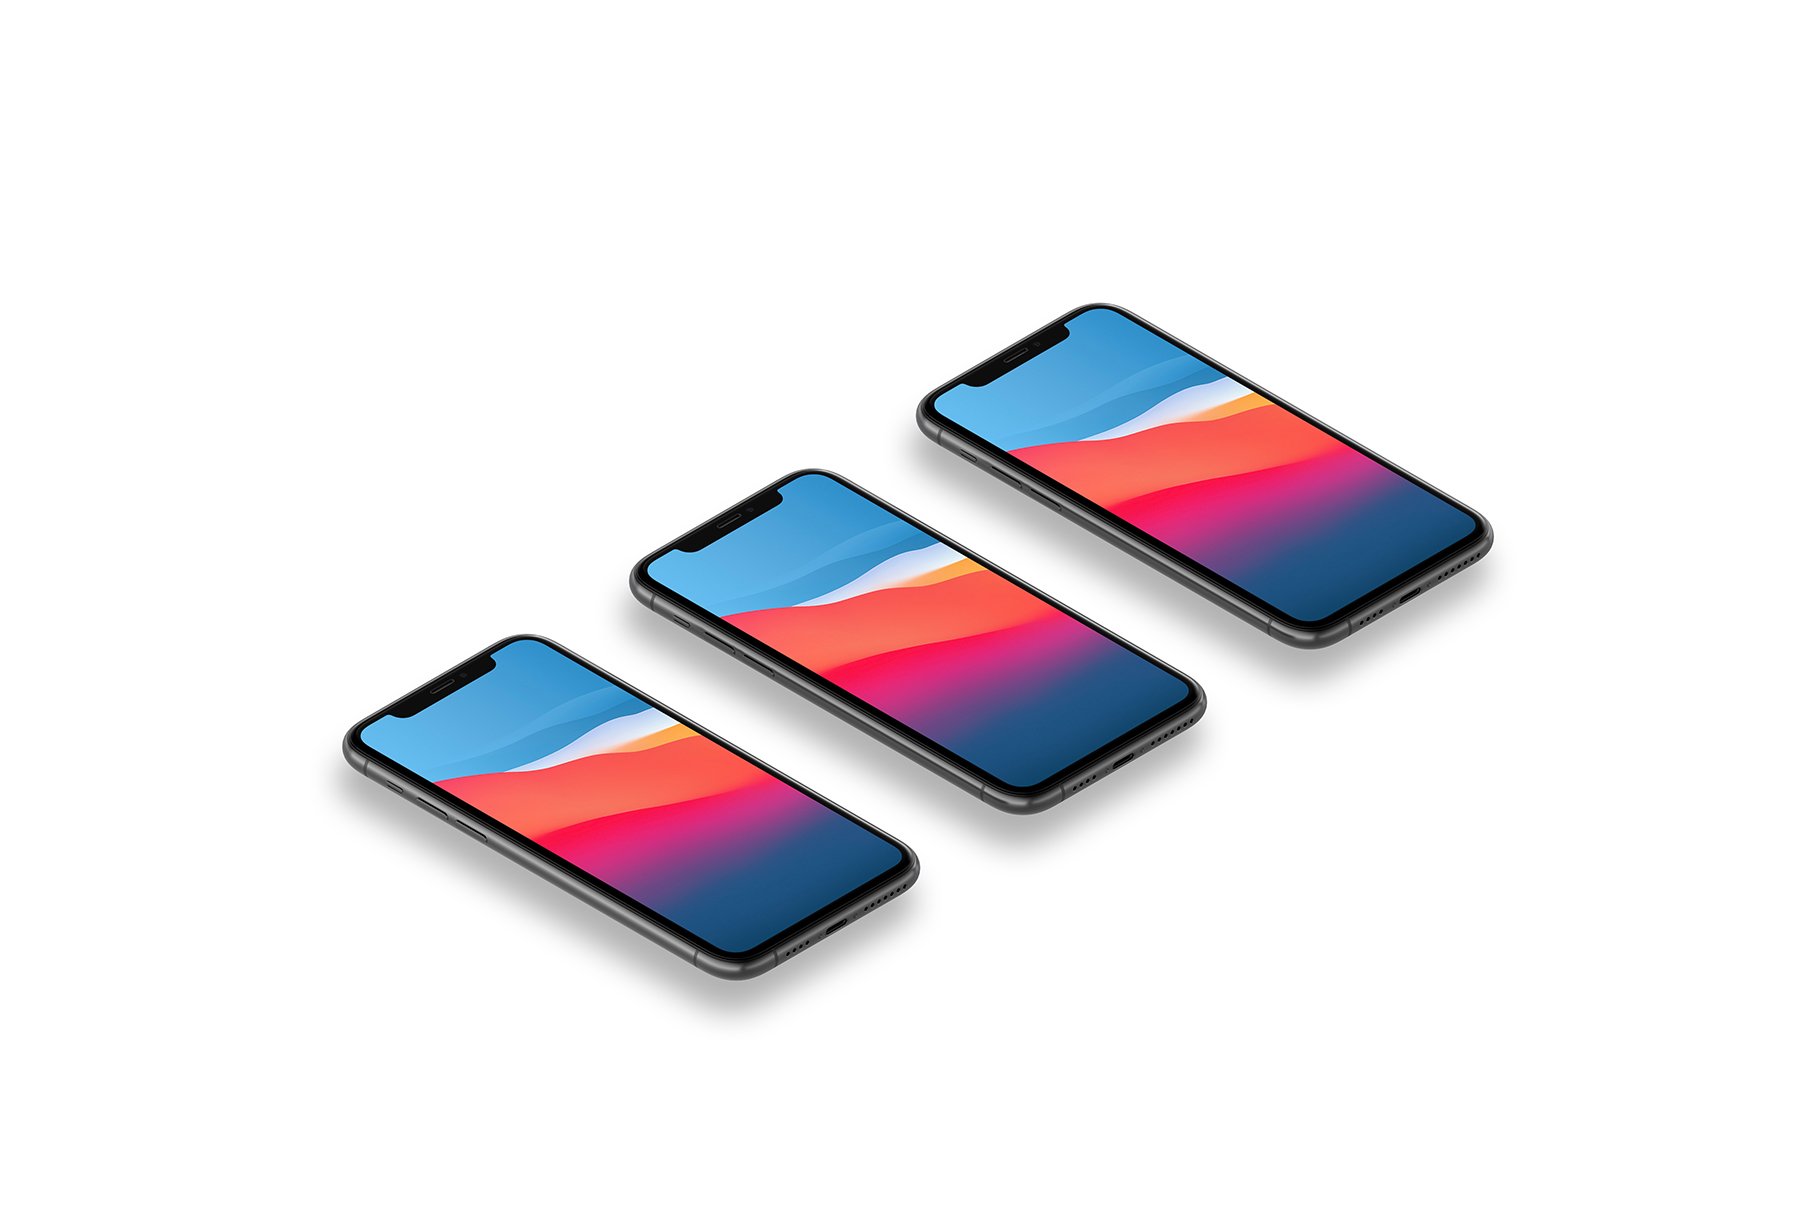 iphone 11 pro mockup pack by anthony boyd graphics 28s529 425